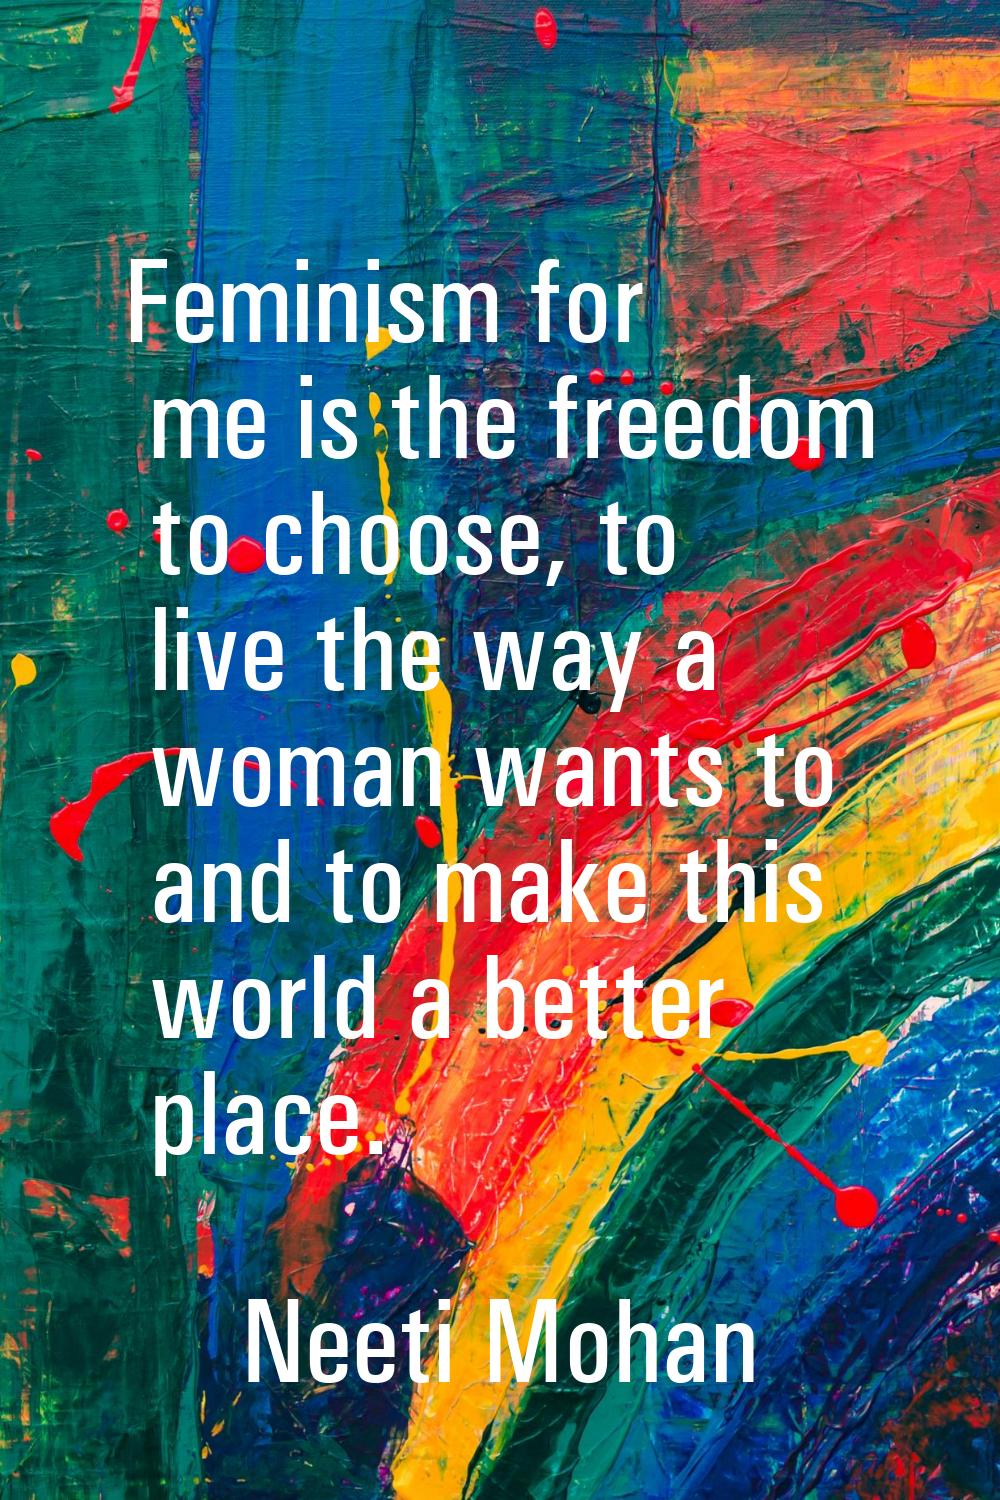 Feminism for me is the freedom to choose, to live the way a woman wants to and to make this world a